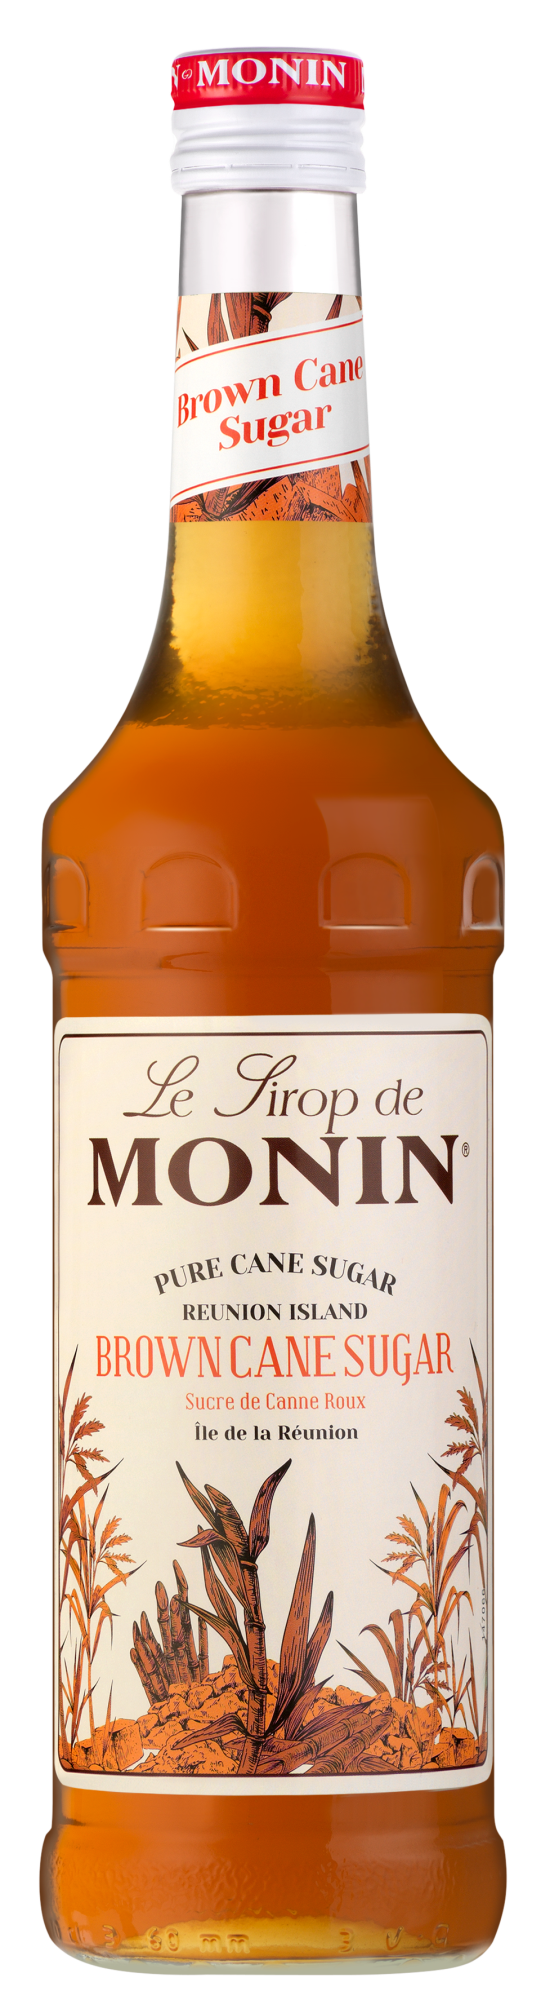 Buy MONIN Brown Cane Sugar syrup. It captures all the intense flavours of this naturally golden sugar